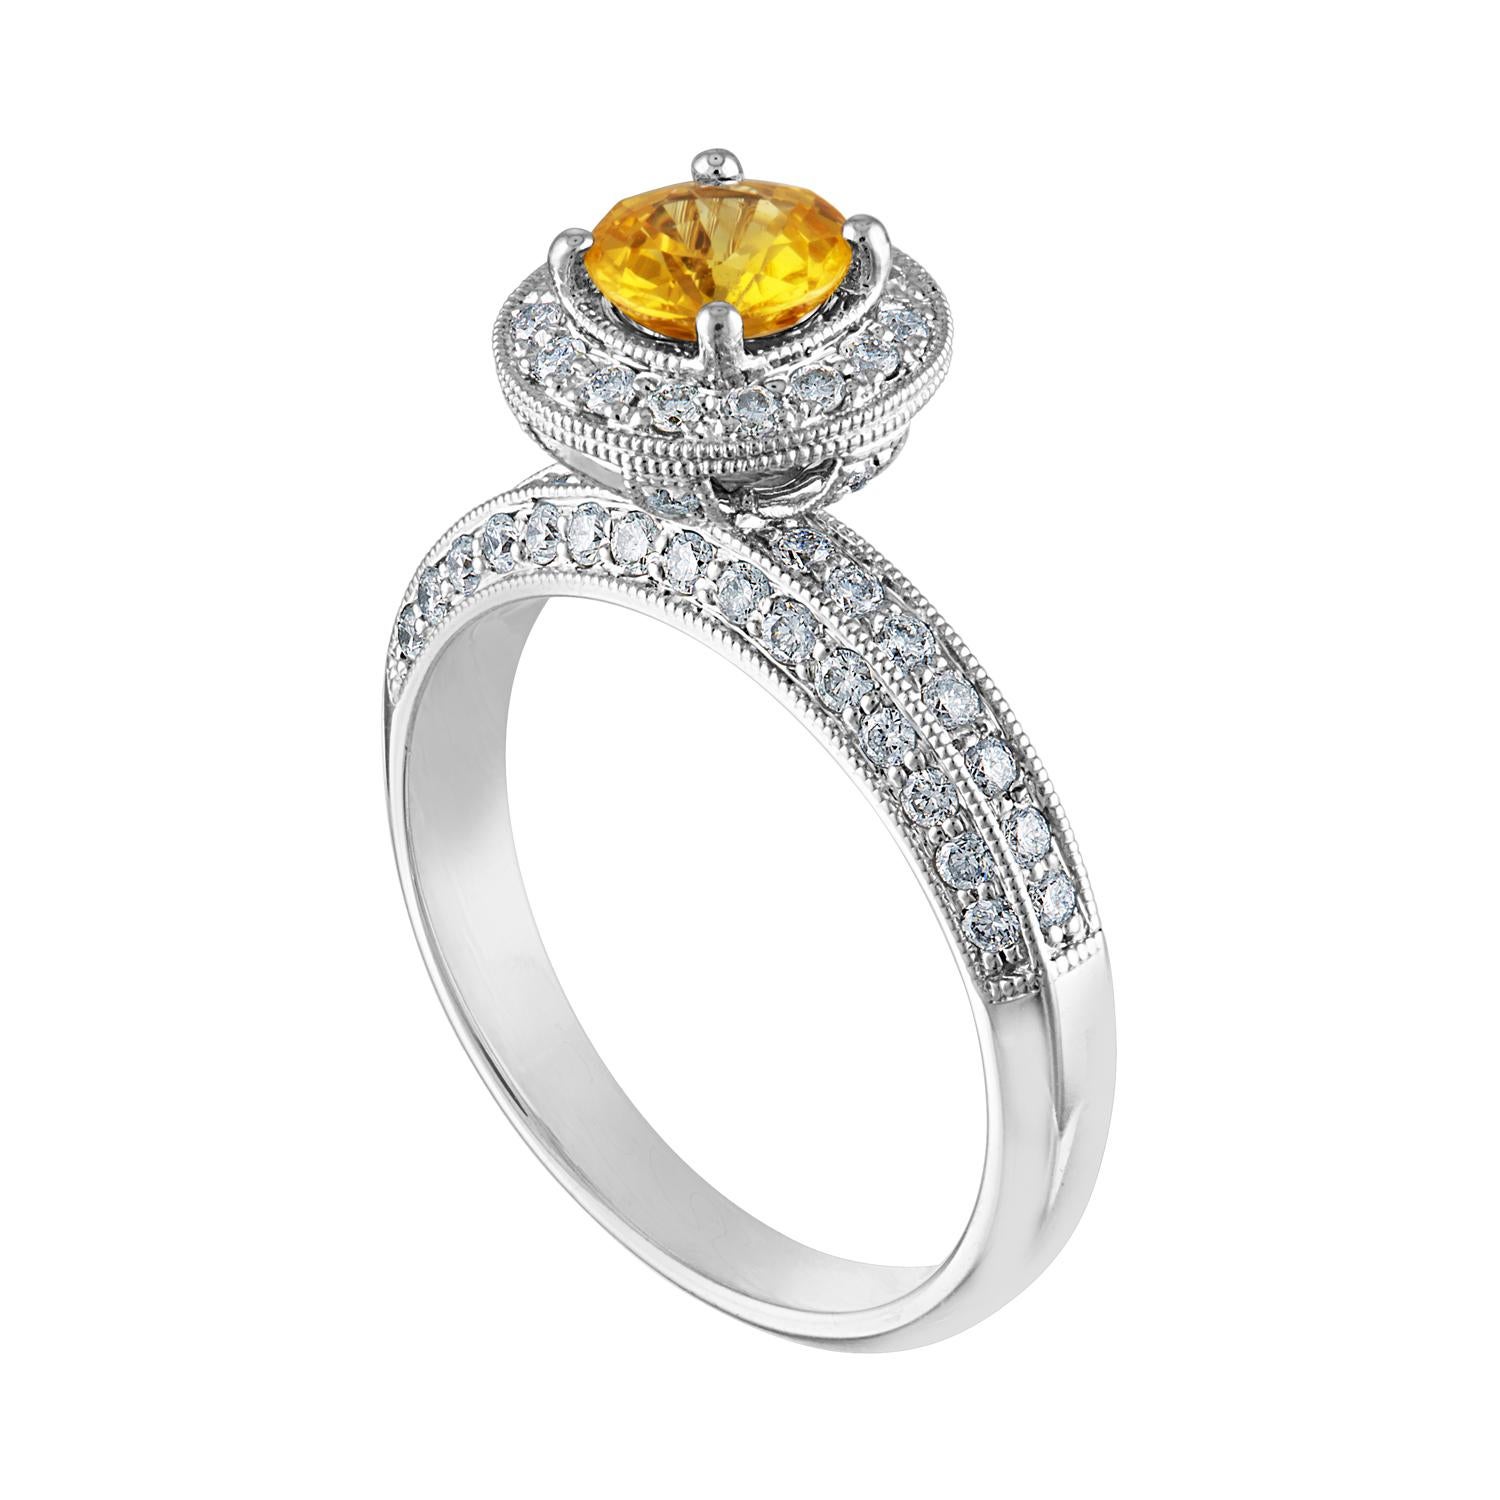 Beautiful Art Deco Revival Round Halo Milgrain Ring
The ring is 14K White Gold
The Center Stone is a Round Yellow Sapphire 0.86 Carats
The Sapphire is AGL Certified Heated
There are 0.85 Carats in Diamonds F/G VS/SI
The ring is a size 7.00,